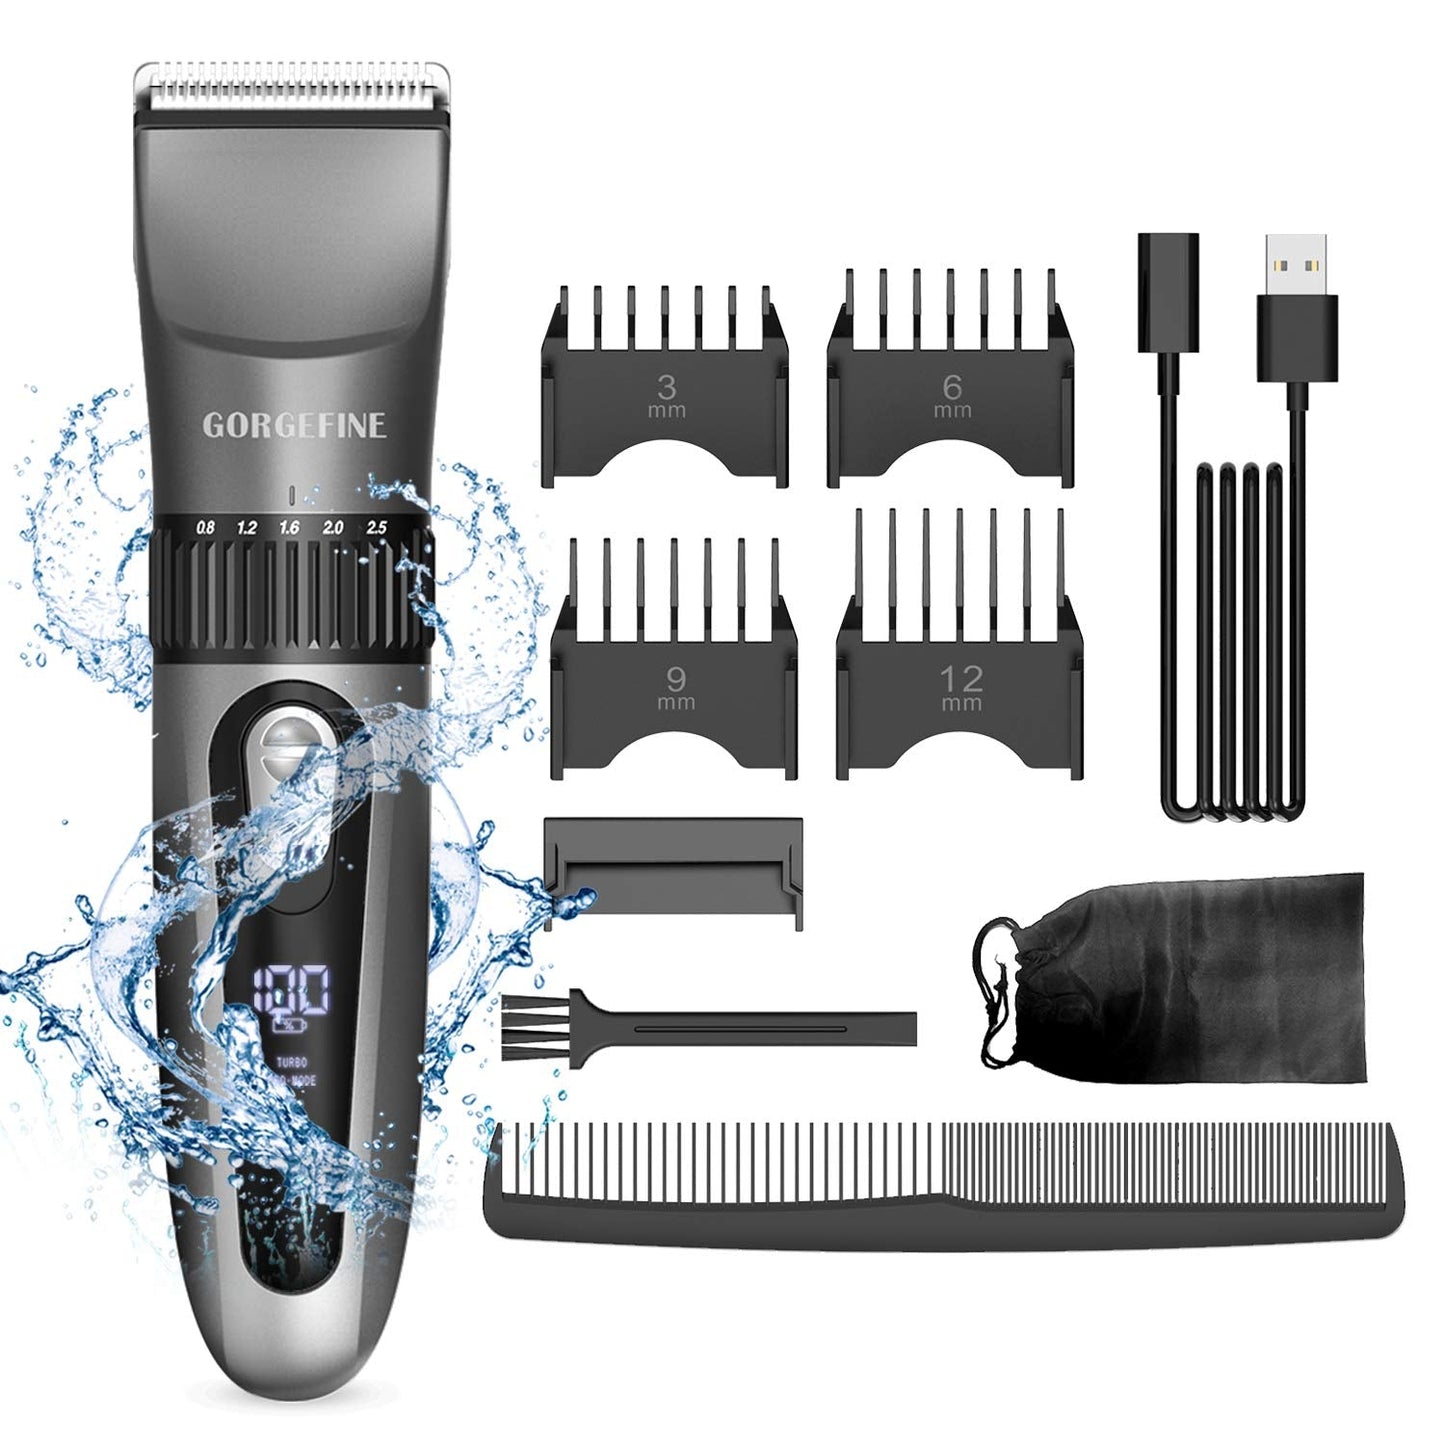 Gorgefine Rechargeable Hair Clipper &amp; Trimmer for Men-Professional Cordless Haircut &amp; Grooming Kit Waterproof with LED Display-Turbo Powerful Mode&amp;Super Silent Mode - Home Decor Gifts and More